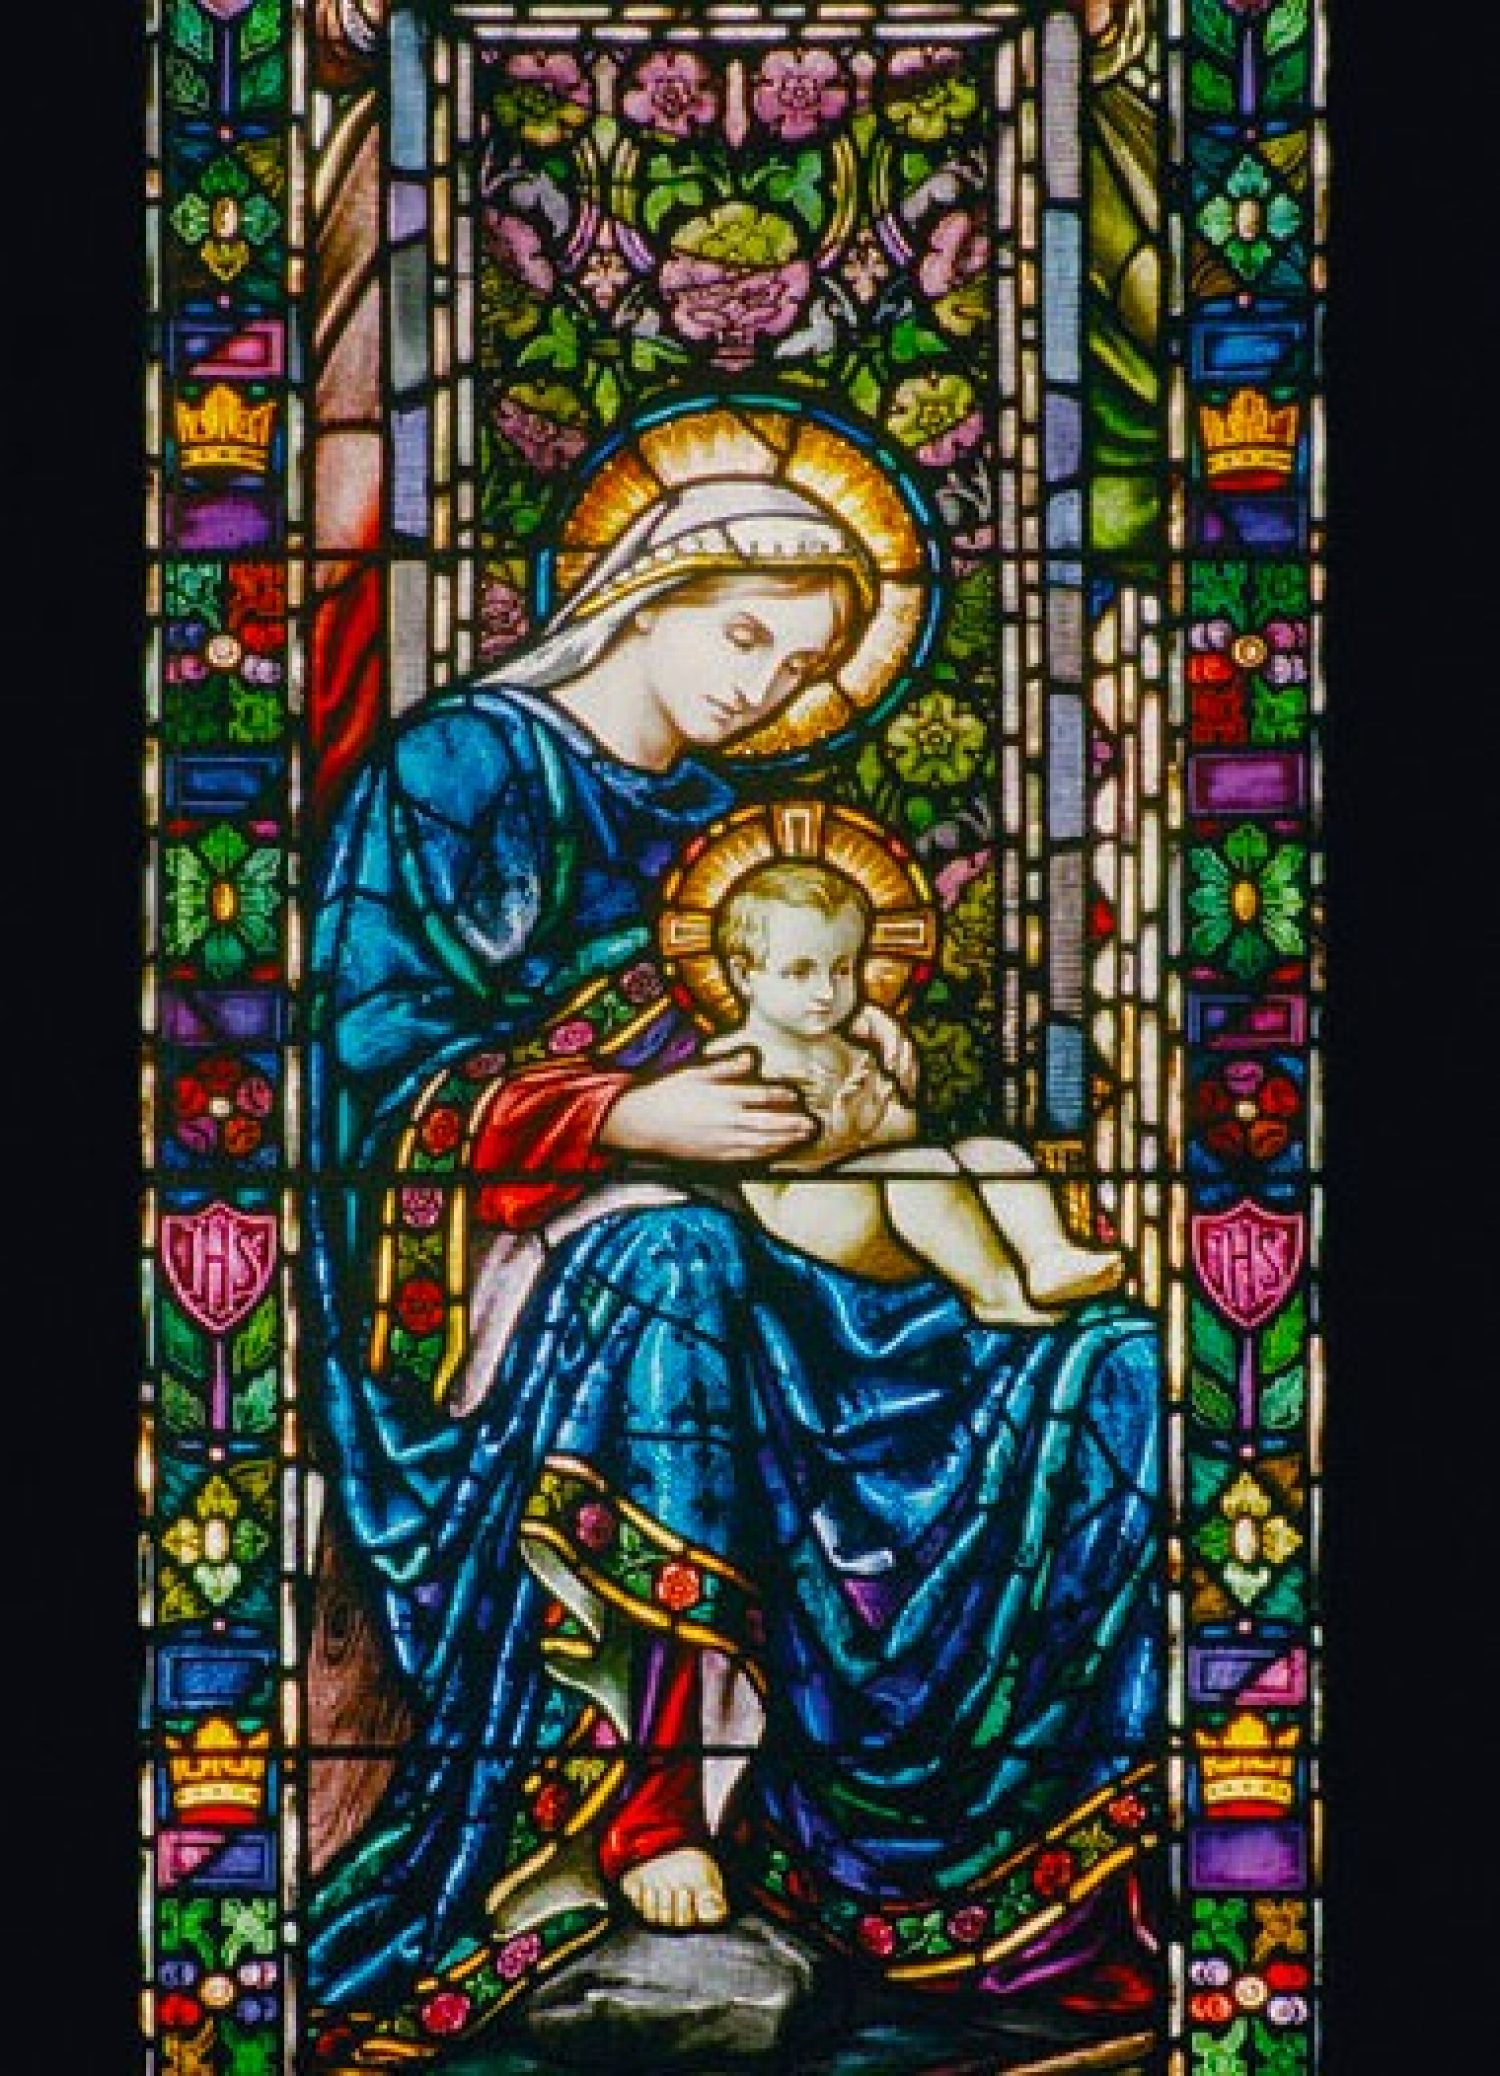 A stained glass window showing Mary and Jesus